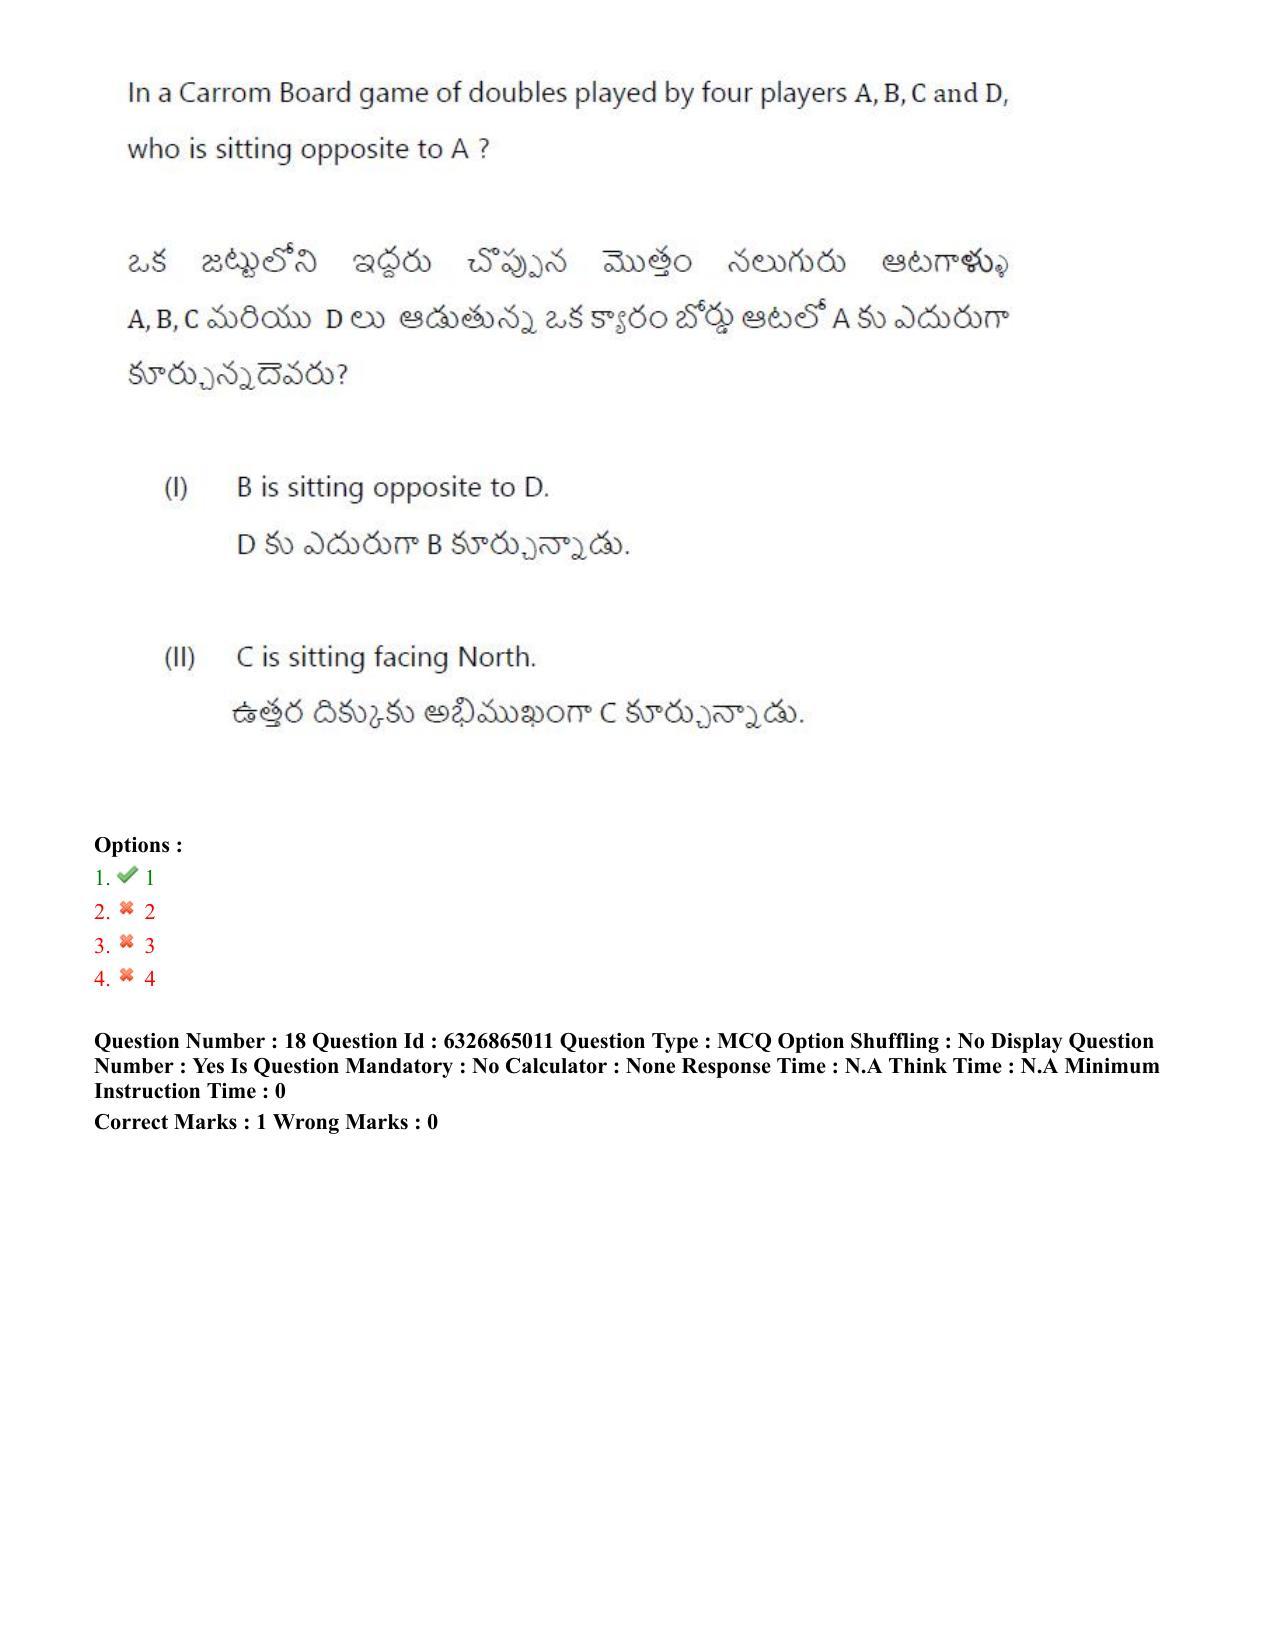 TS ICET 2022 Question Paper 2 - Jul 28, 2022	 - Page 16